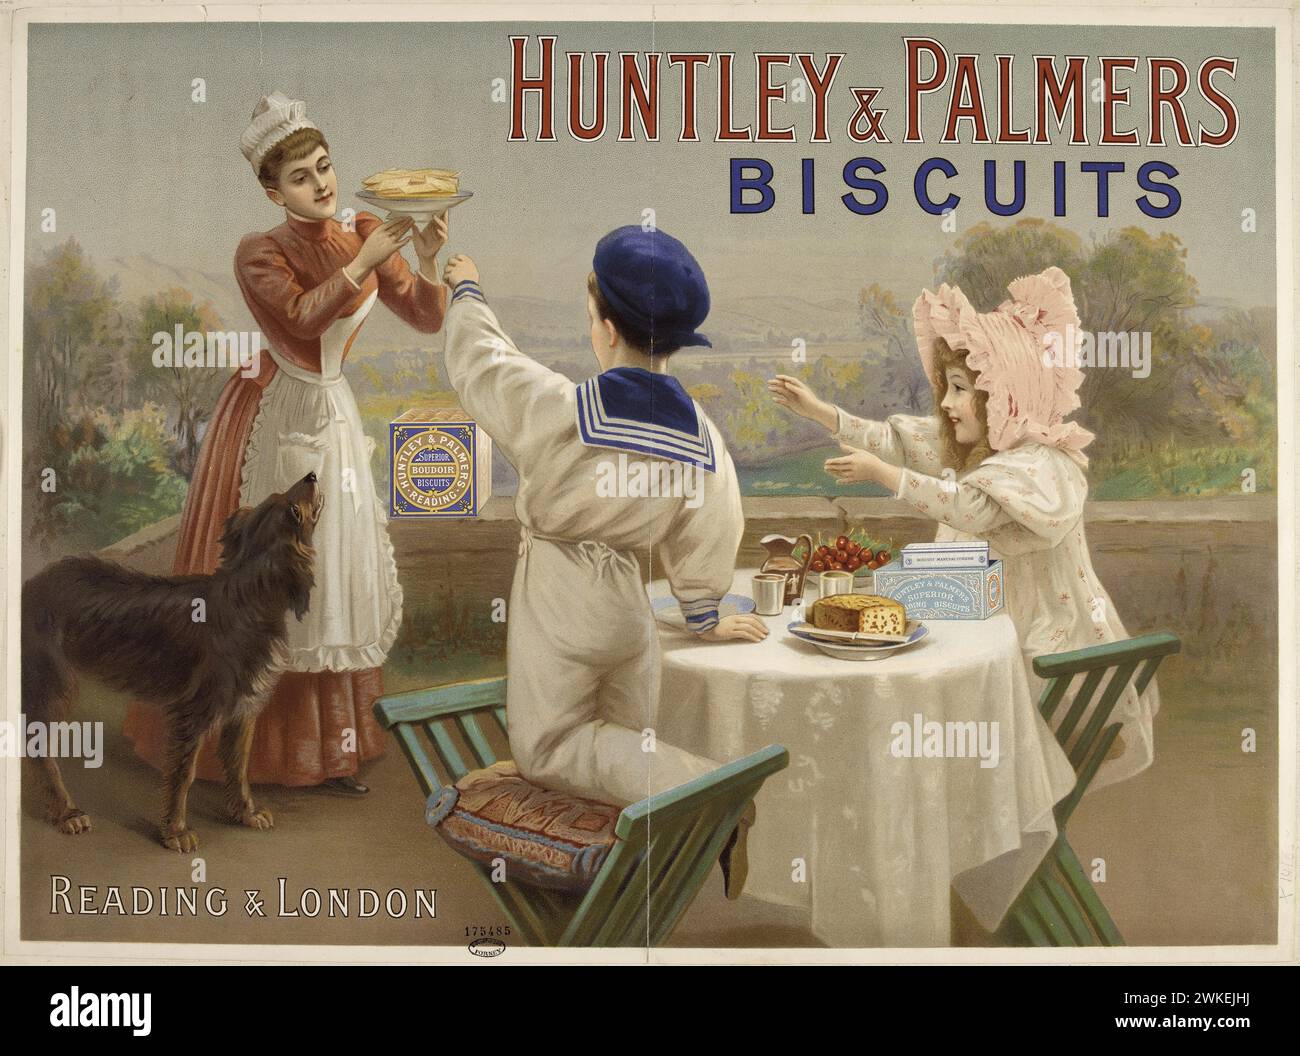 Huntley & Palmers Biscuits. Museum: PRIVATE COLLECTION. Author: ANONYMOUS. Stock Photo